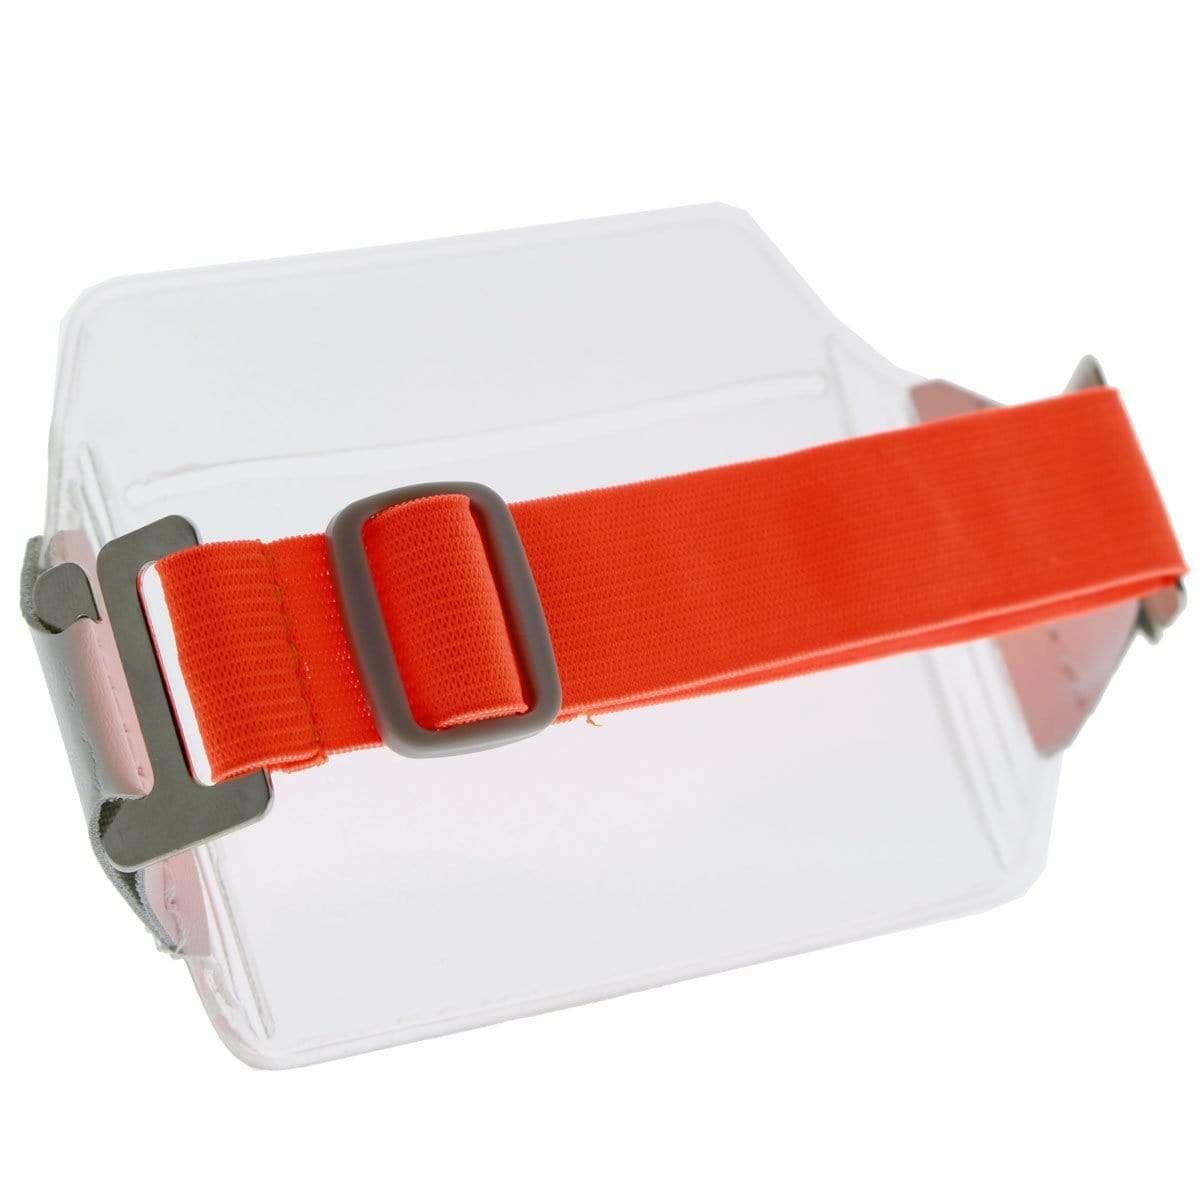 A bright orange strap with metal buckles attached to a Clear Over Size Vinyl Horizontal Arm Band Badge Holder (P/N 1840-7100).